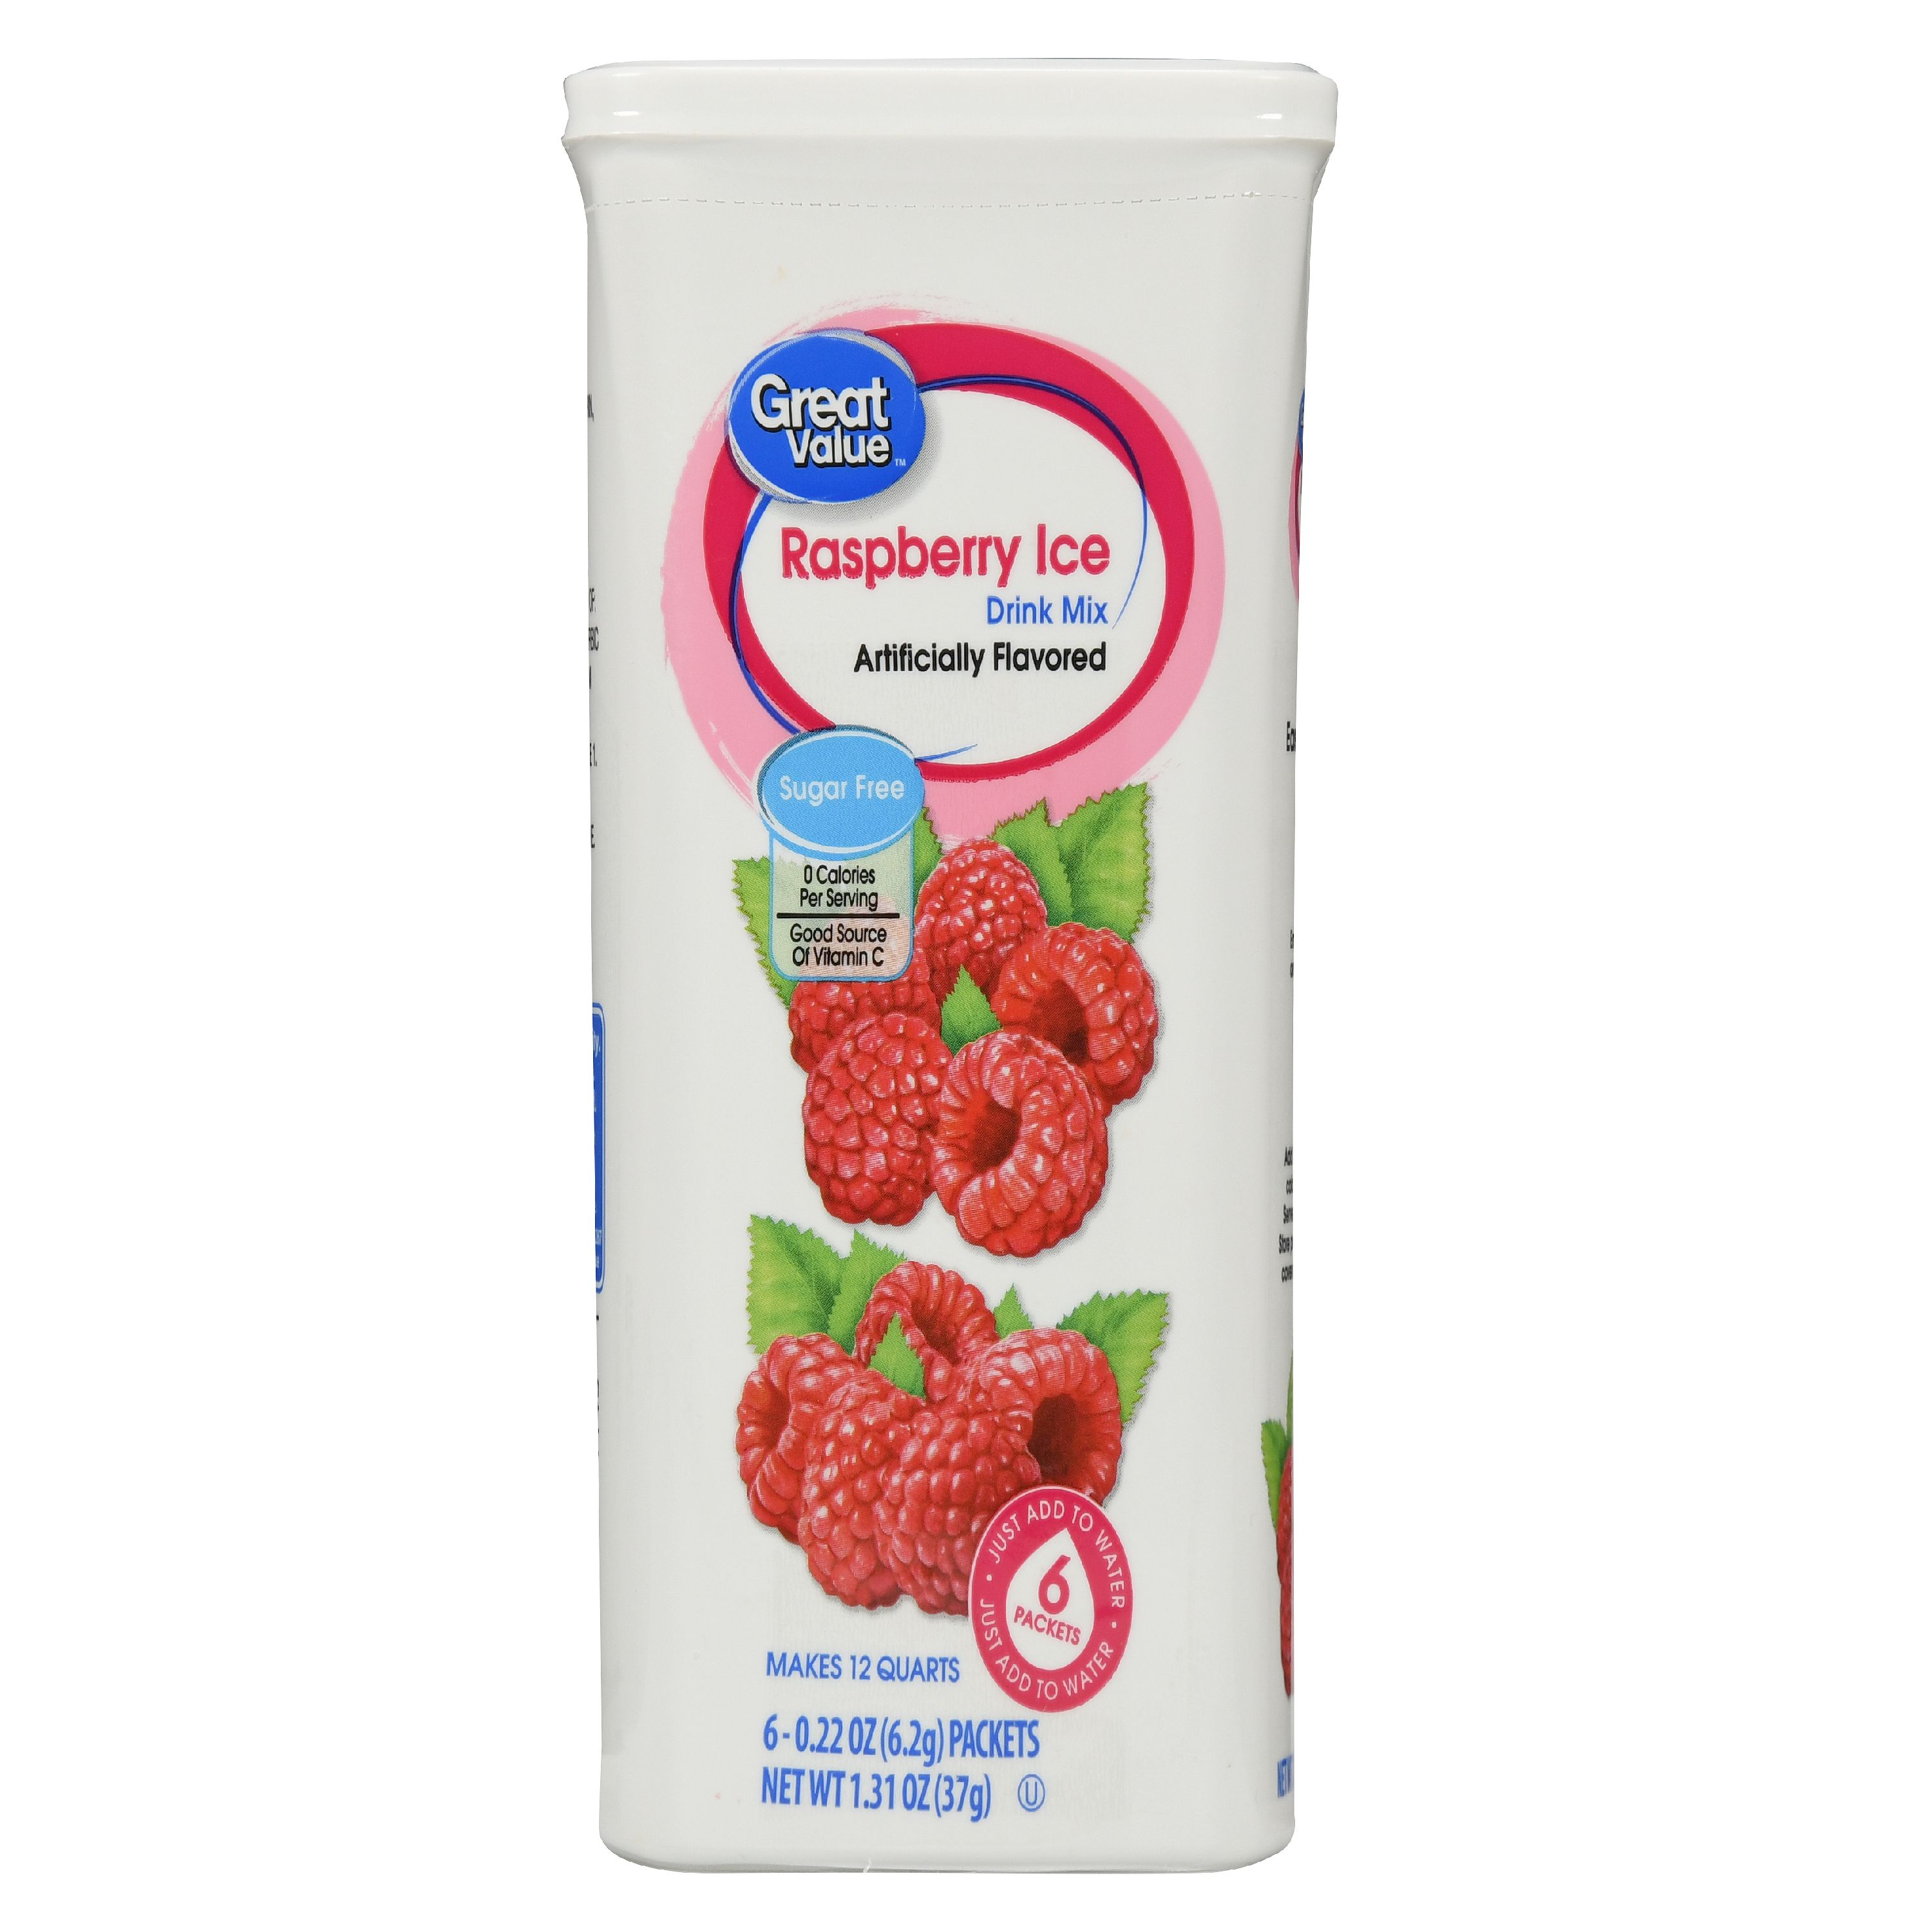 Great Value Sugar-Free Raspberry Ice Drink Mix, 0.22 Oz., 6 Count Image